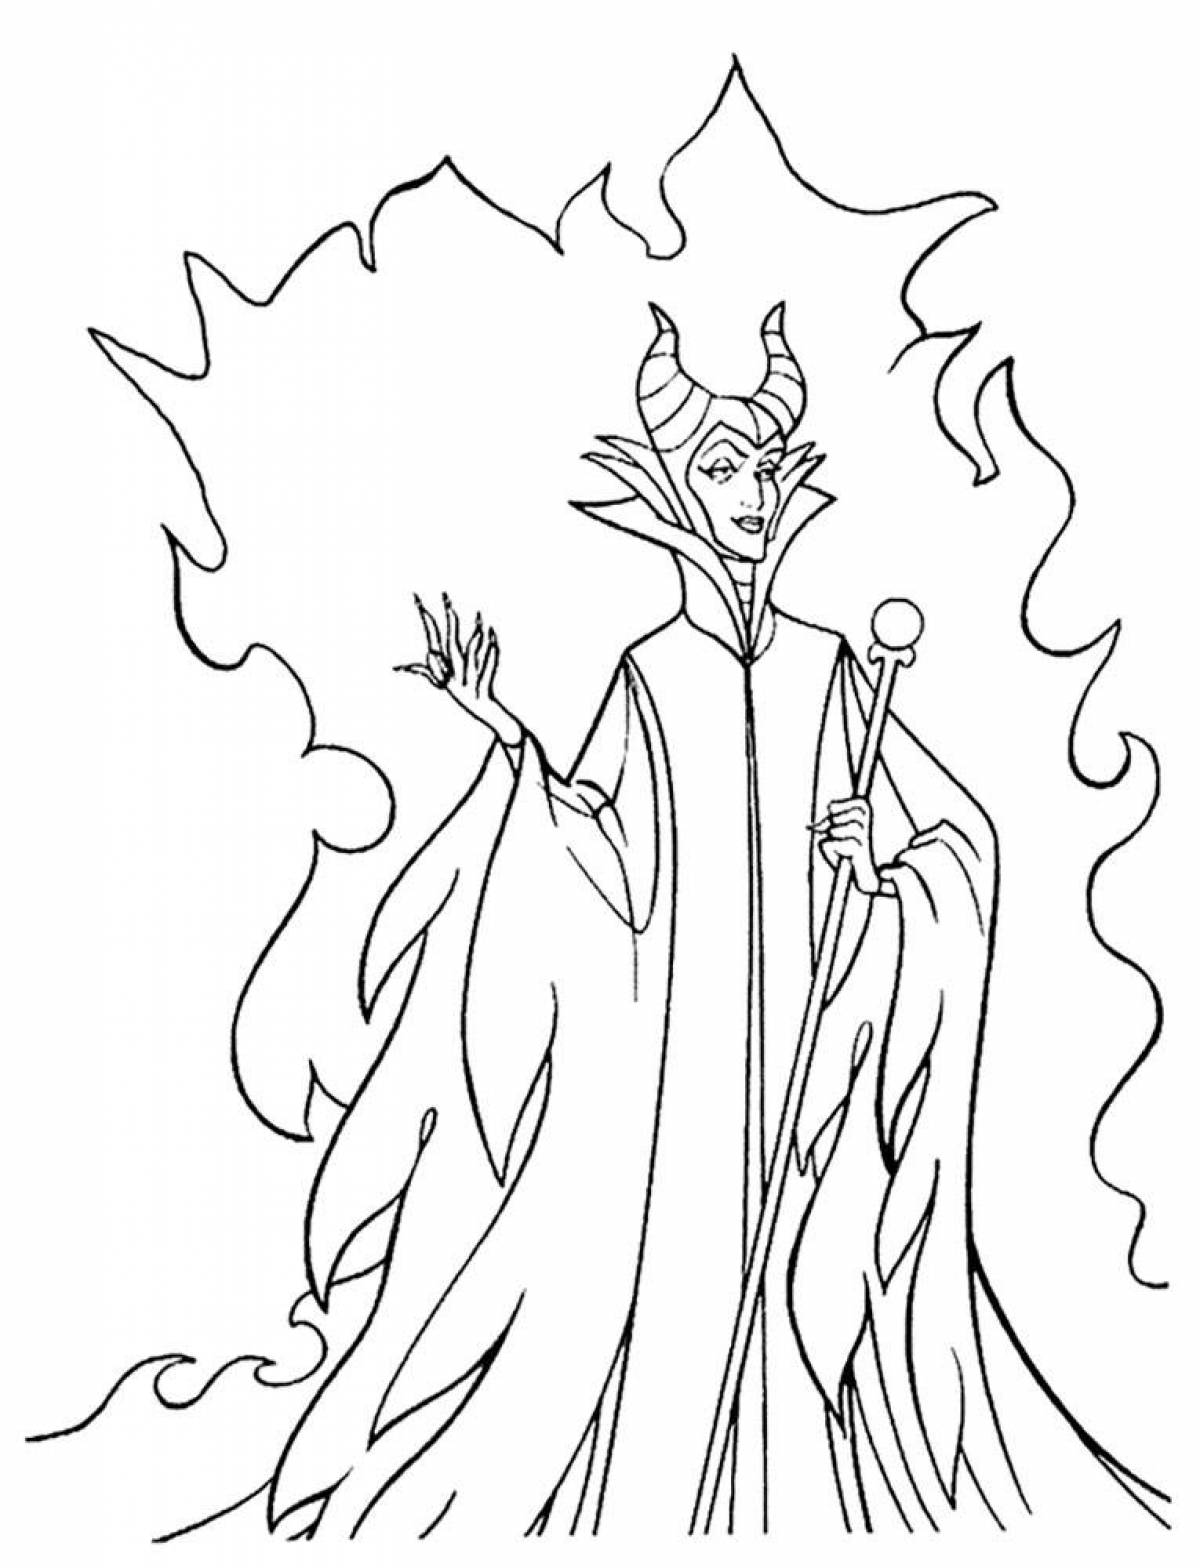 Maleficent's intriguing coloring book